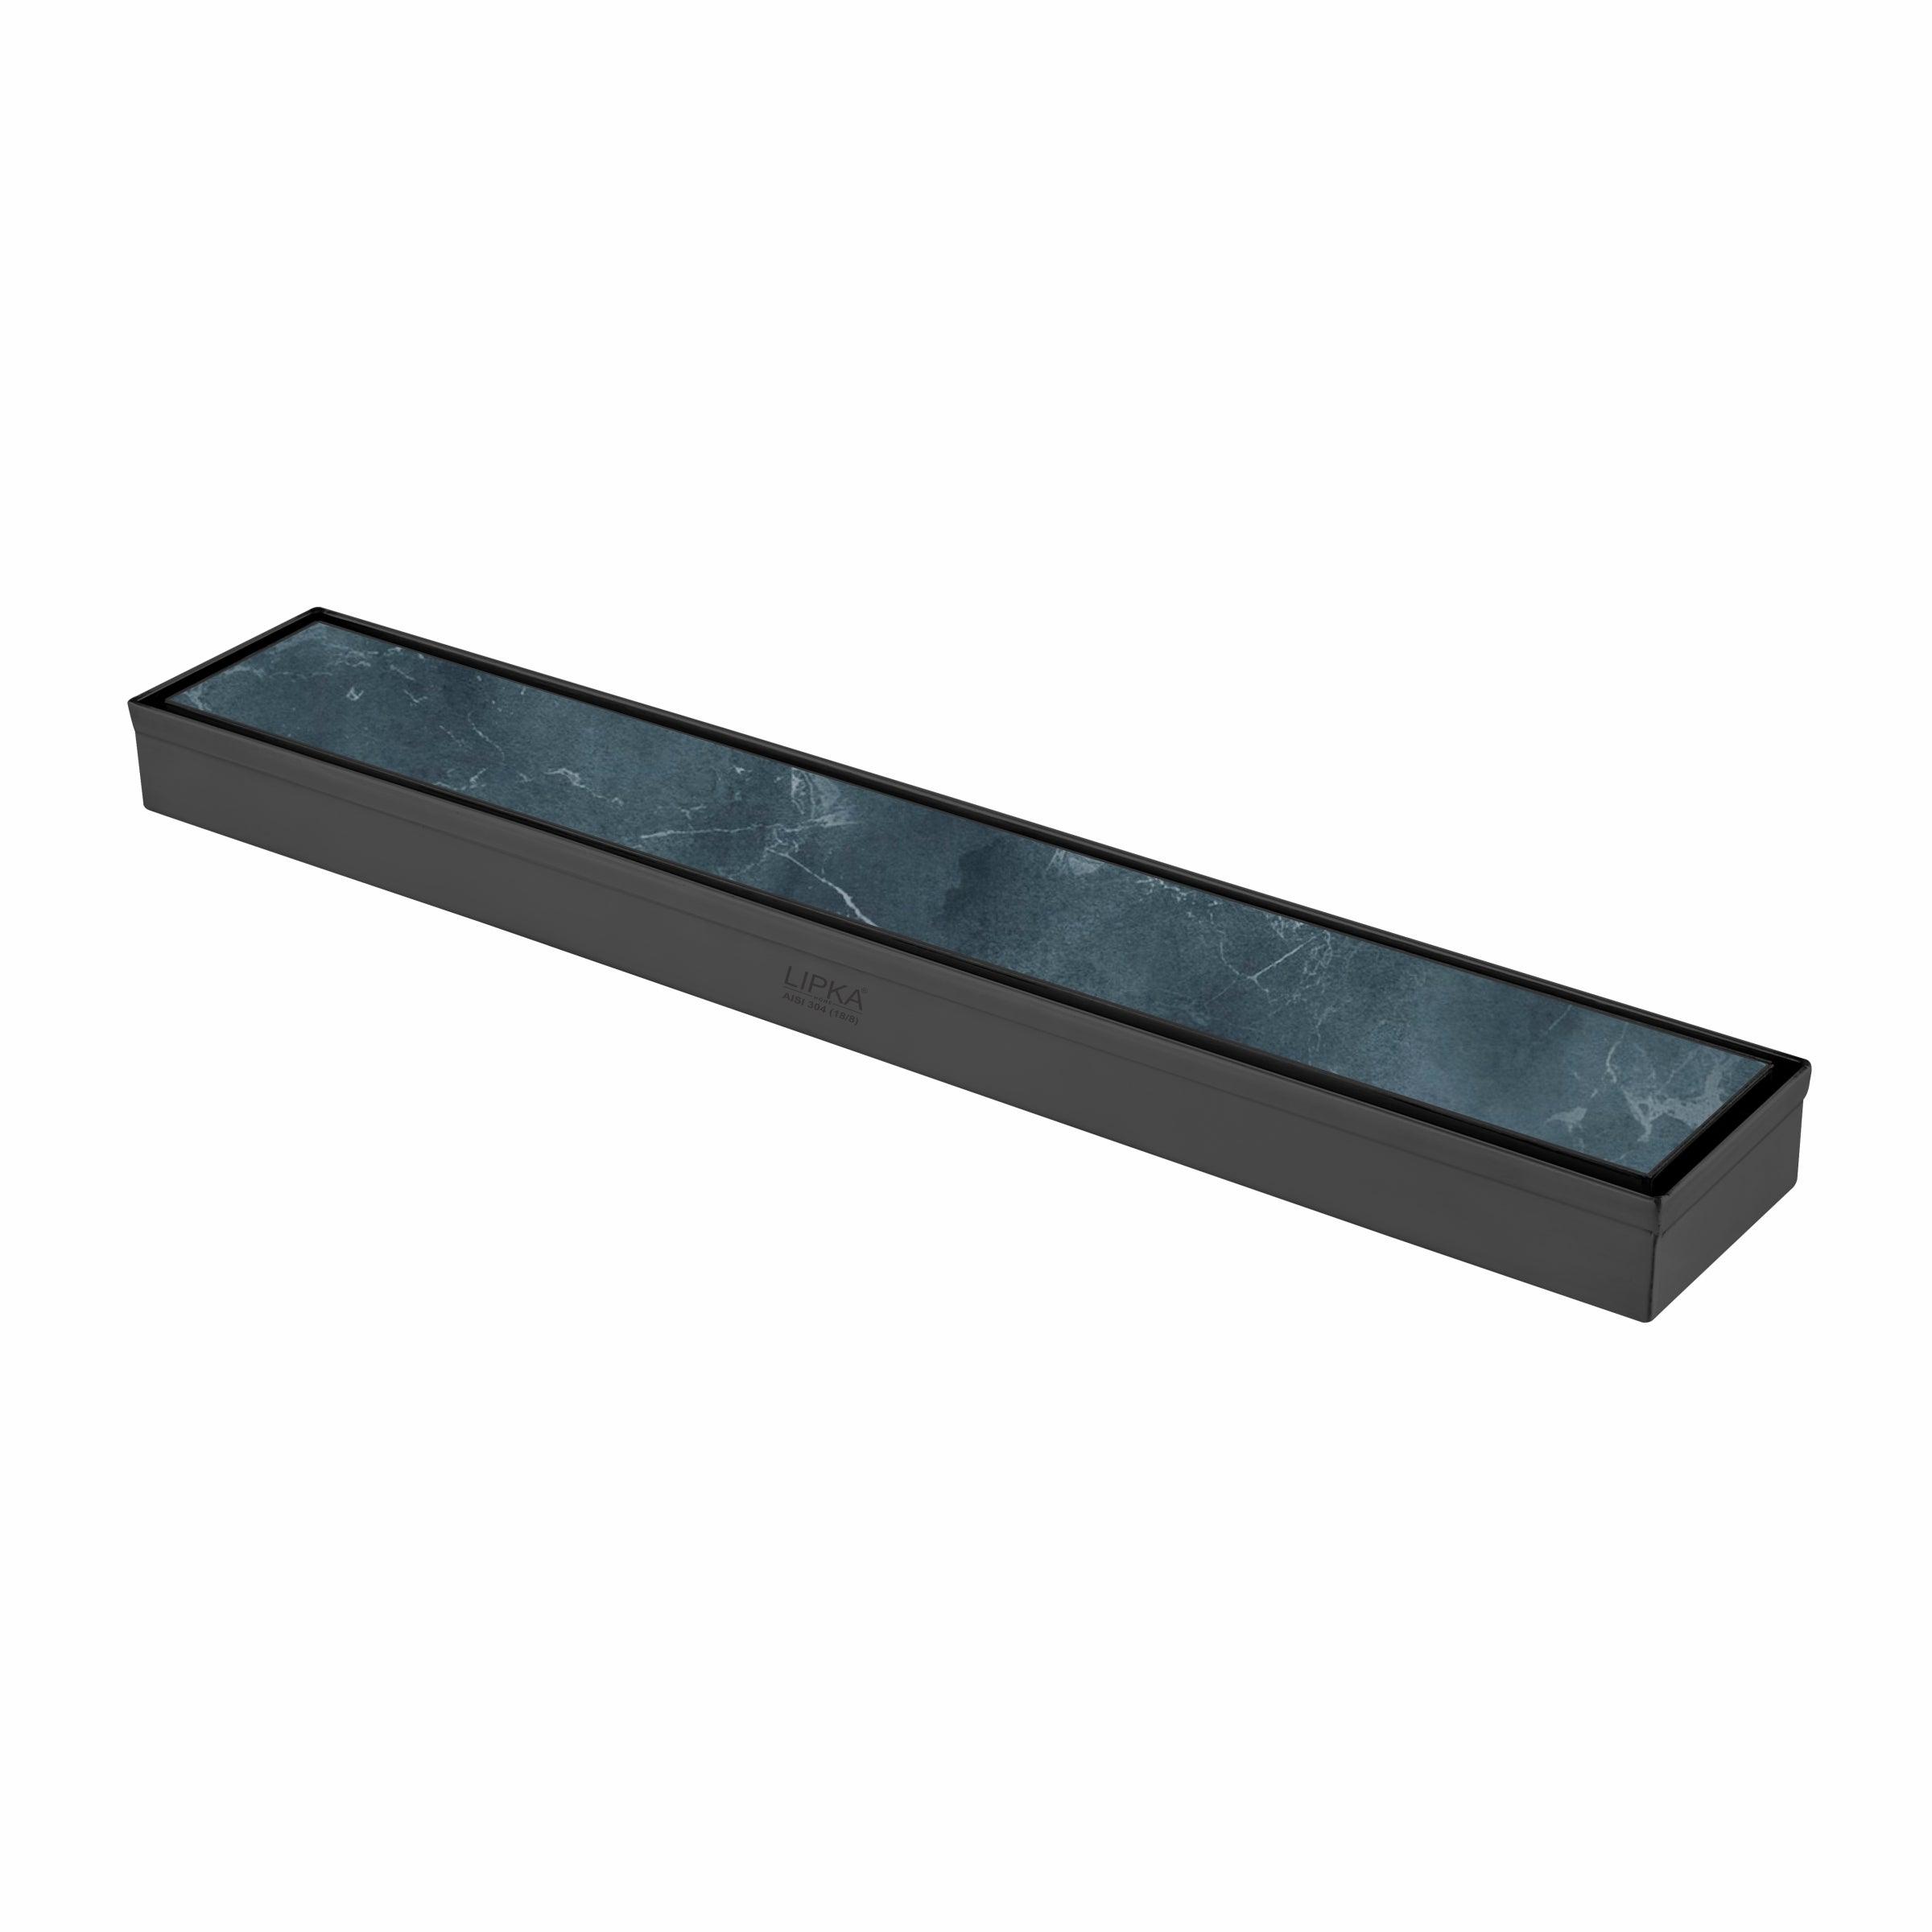 Tile Insert Shower Drain Channel - Black (18 x 2 Inches)